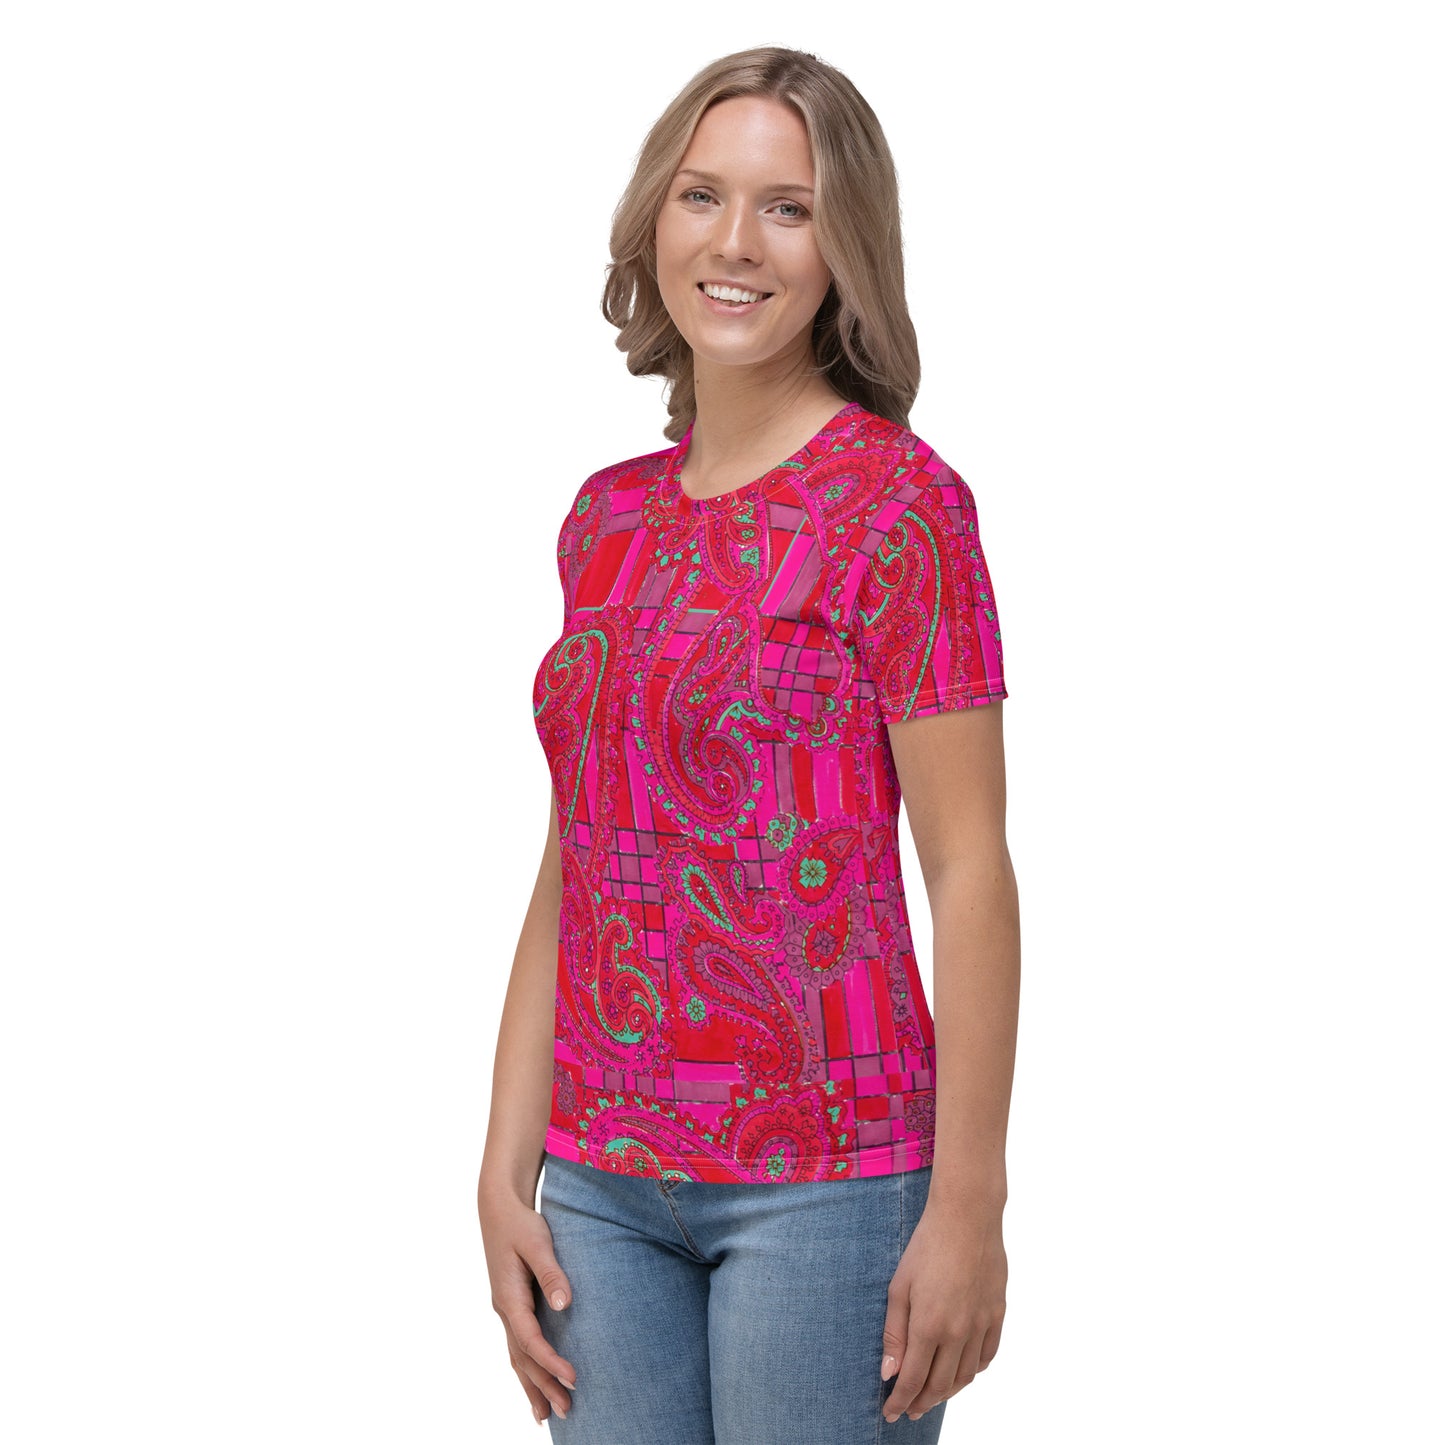 Bright Fuscia and Red Poppy Paisley on Plaid Women's T-shirt